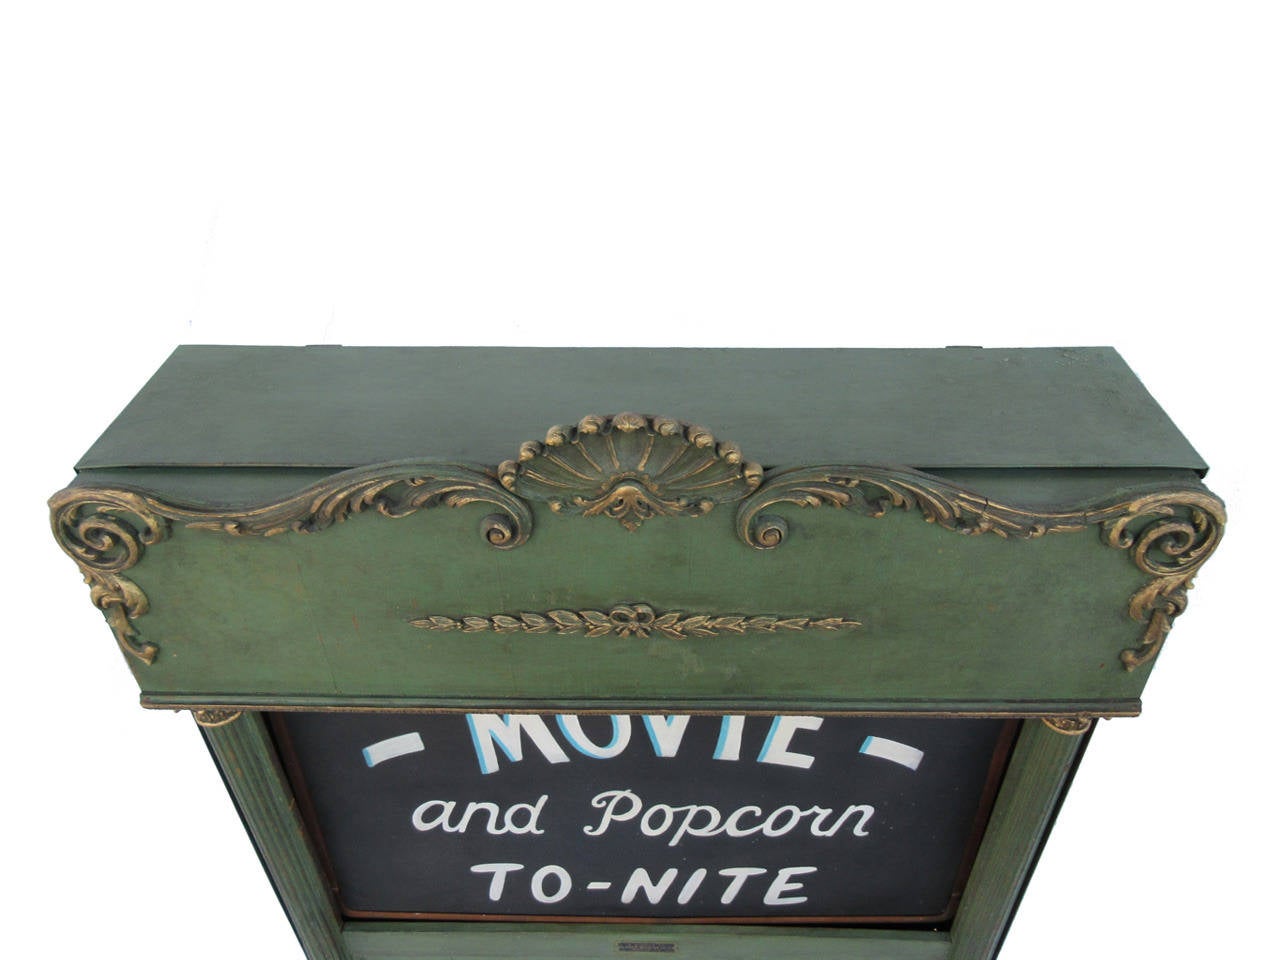 Rare and unique wood electrified movie marquee, circa 1920.
Made by and signed 'The Davis Bulletin Co. Inc Buffalo NY, Patented March, 1918 and June, 1925,' showing gold gilt fretwork and decoration and an interior copper framed hand-painted